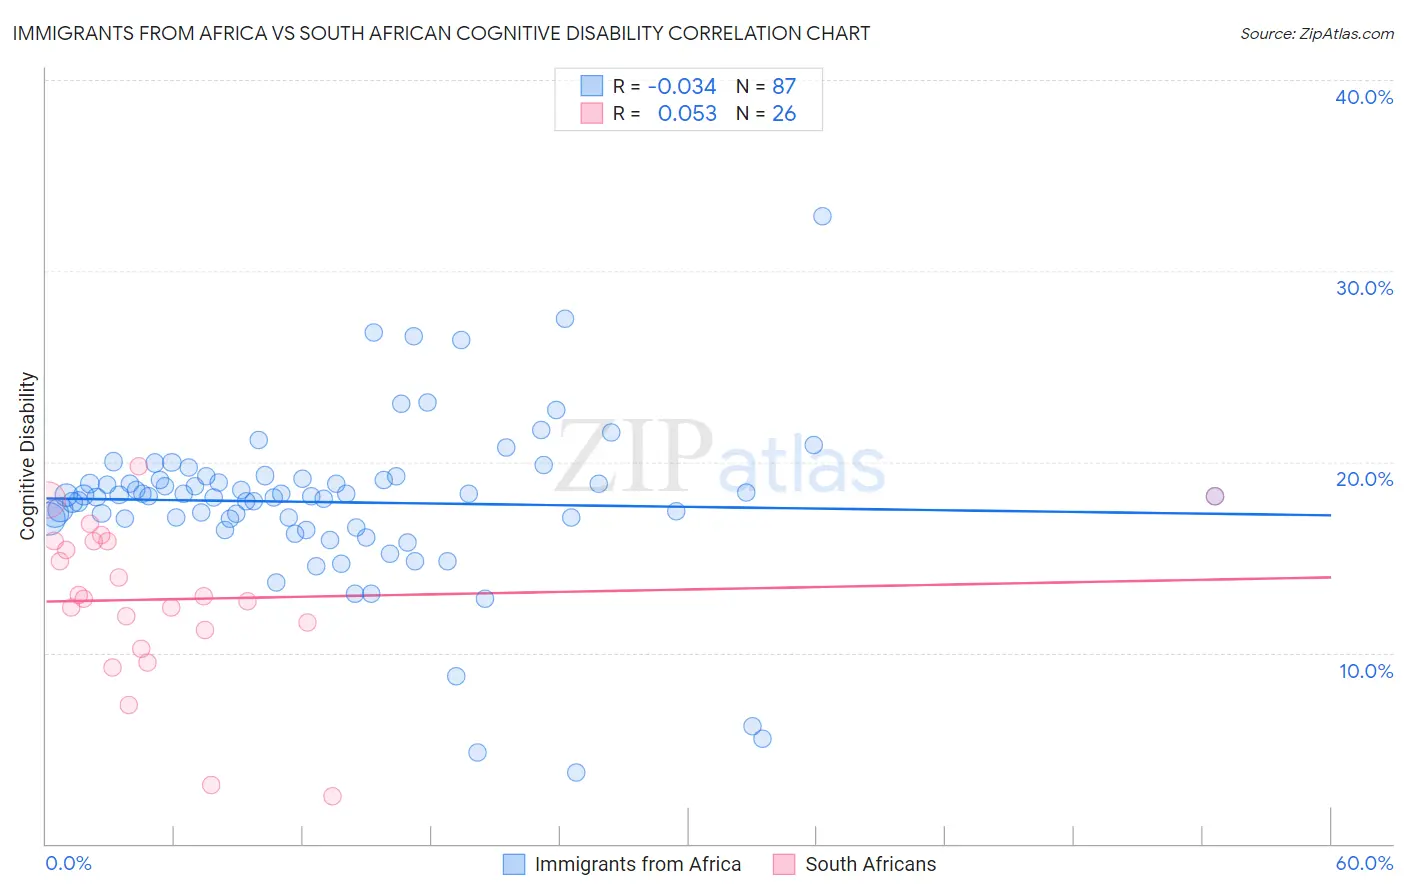 Immigrants from Africa vs South African Cognitive Disability